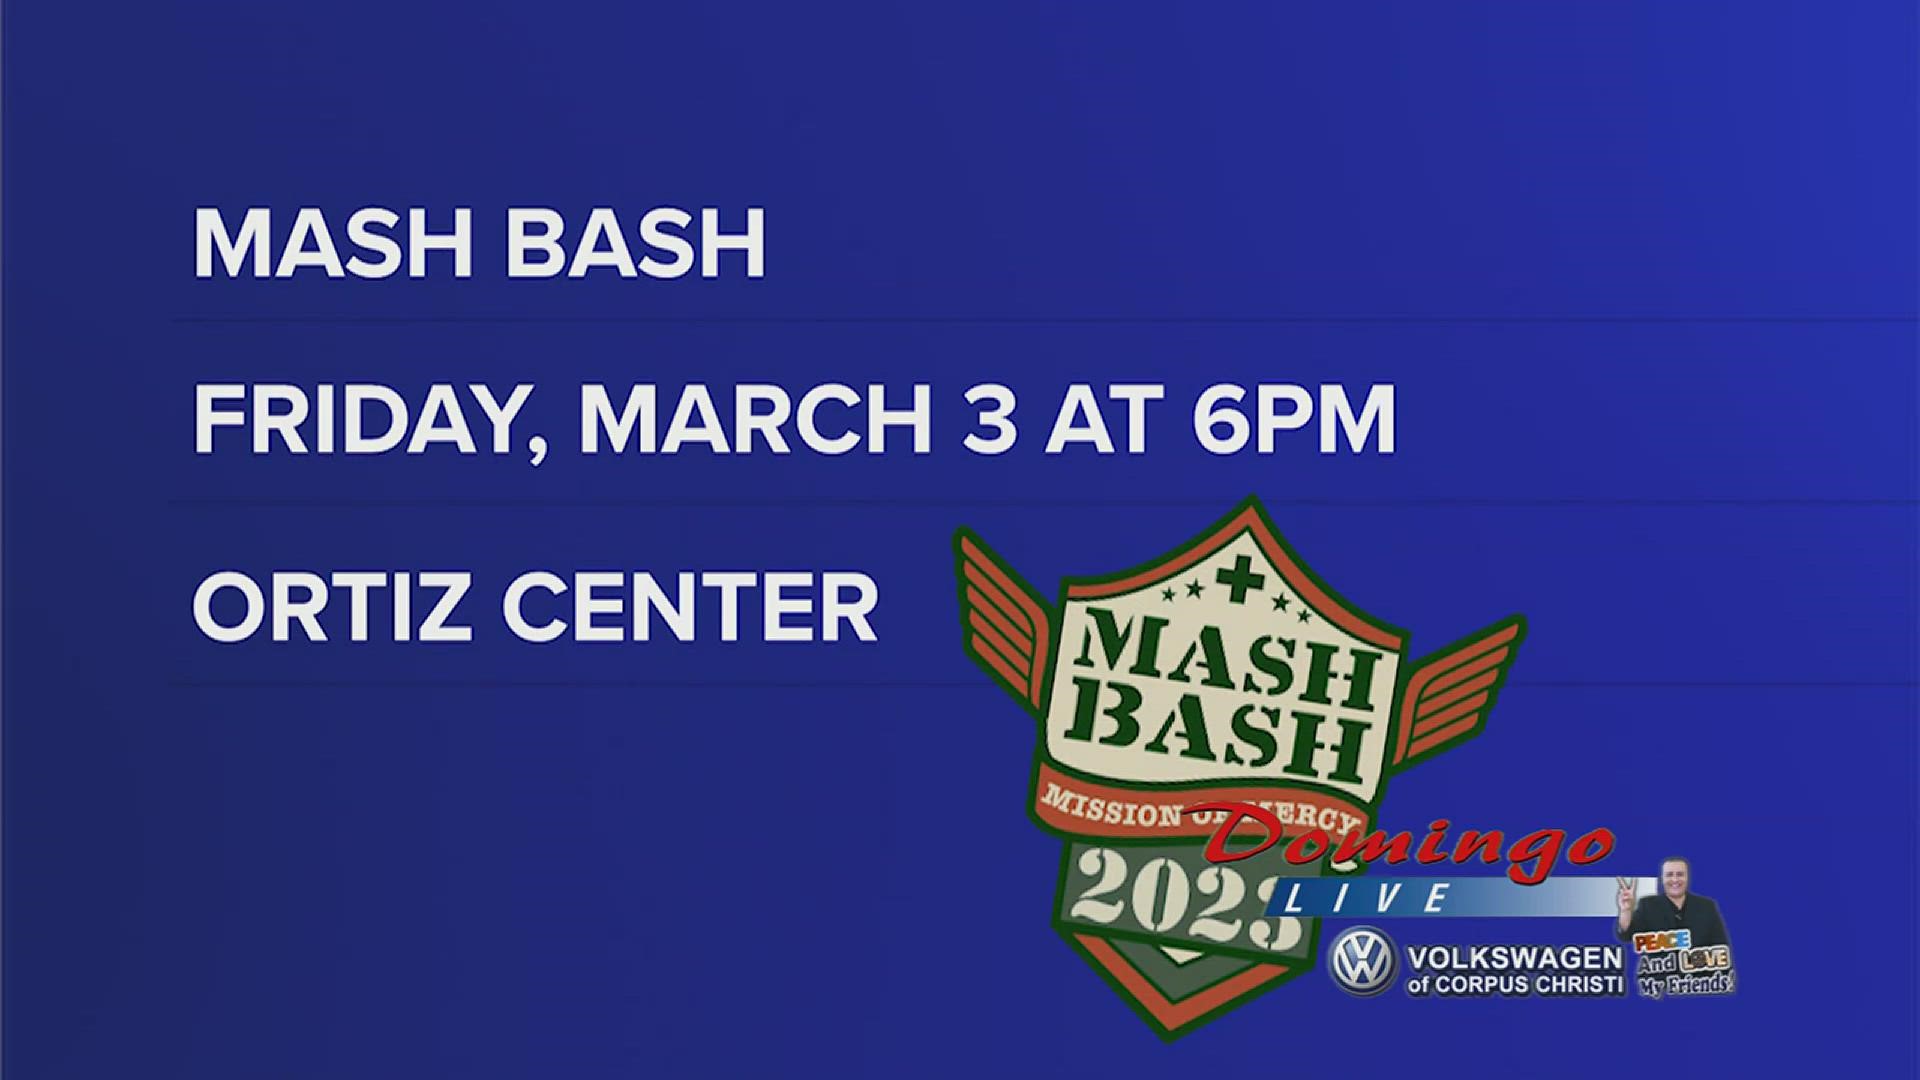 Mission of Mercy Executive Director Sherry Bowers joined us live to tell us how we can fall-in for the long-awaited MASH BASH 2023.